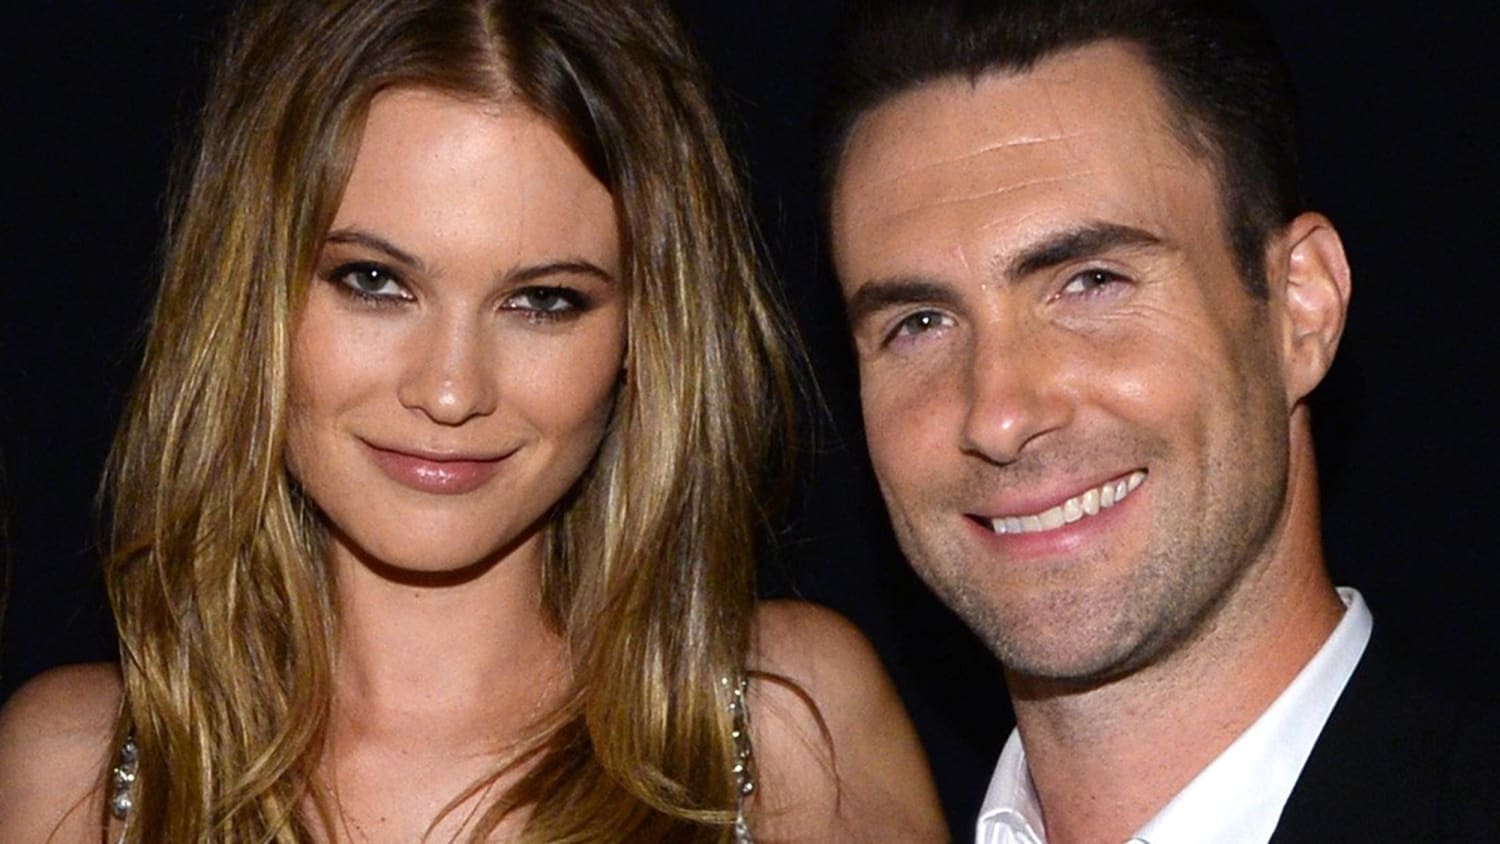 Adam Levine delivers sweet serenade to wife for first anniversary